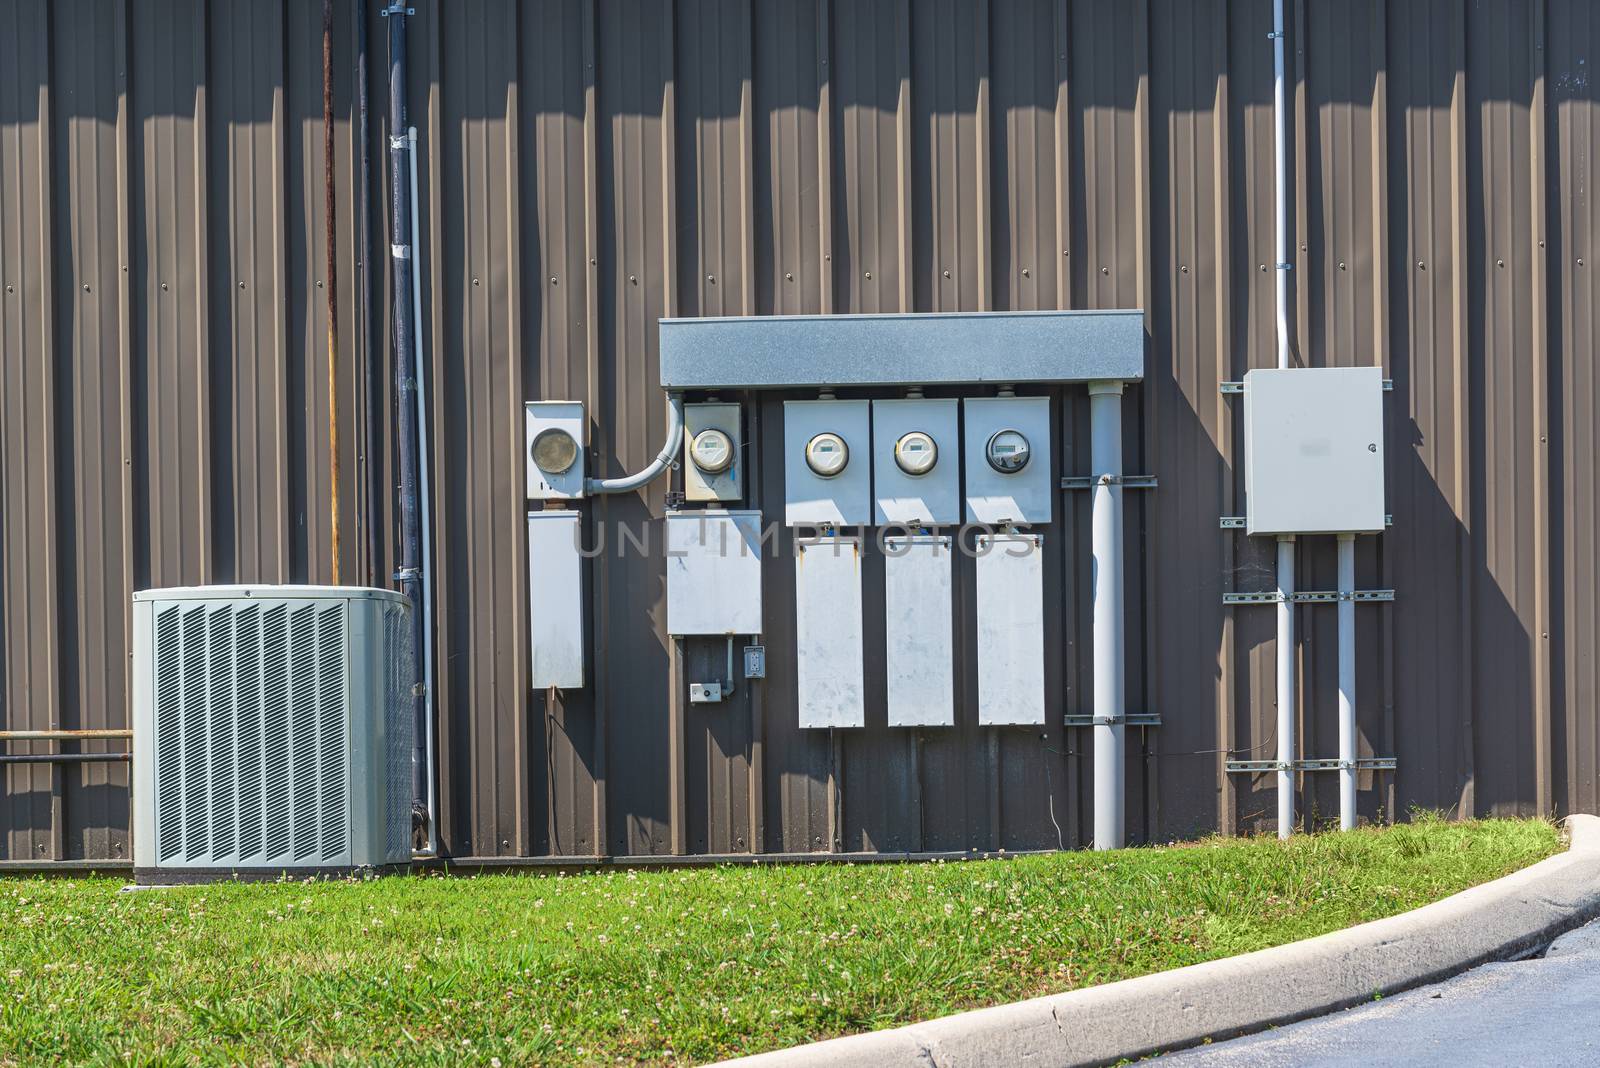 Horizontal shot of an air conditioner and electric meters outside of an office complex.